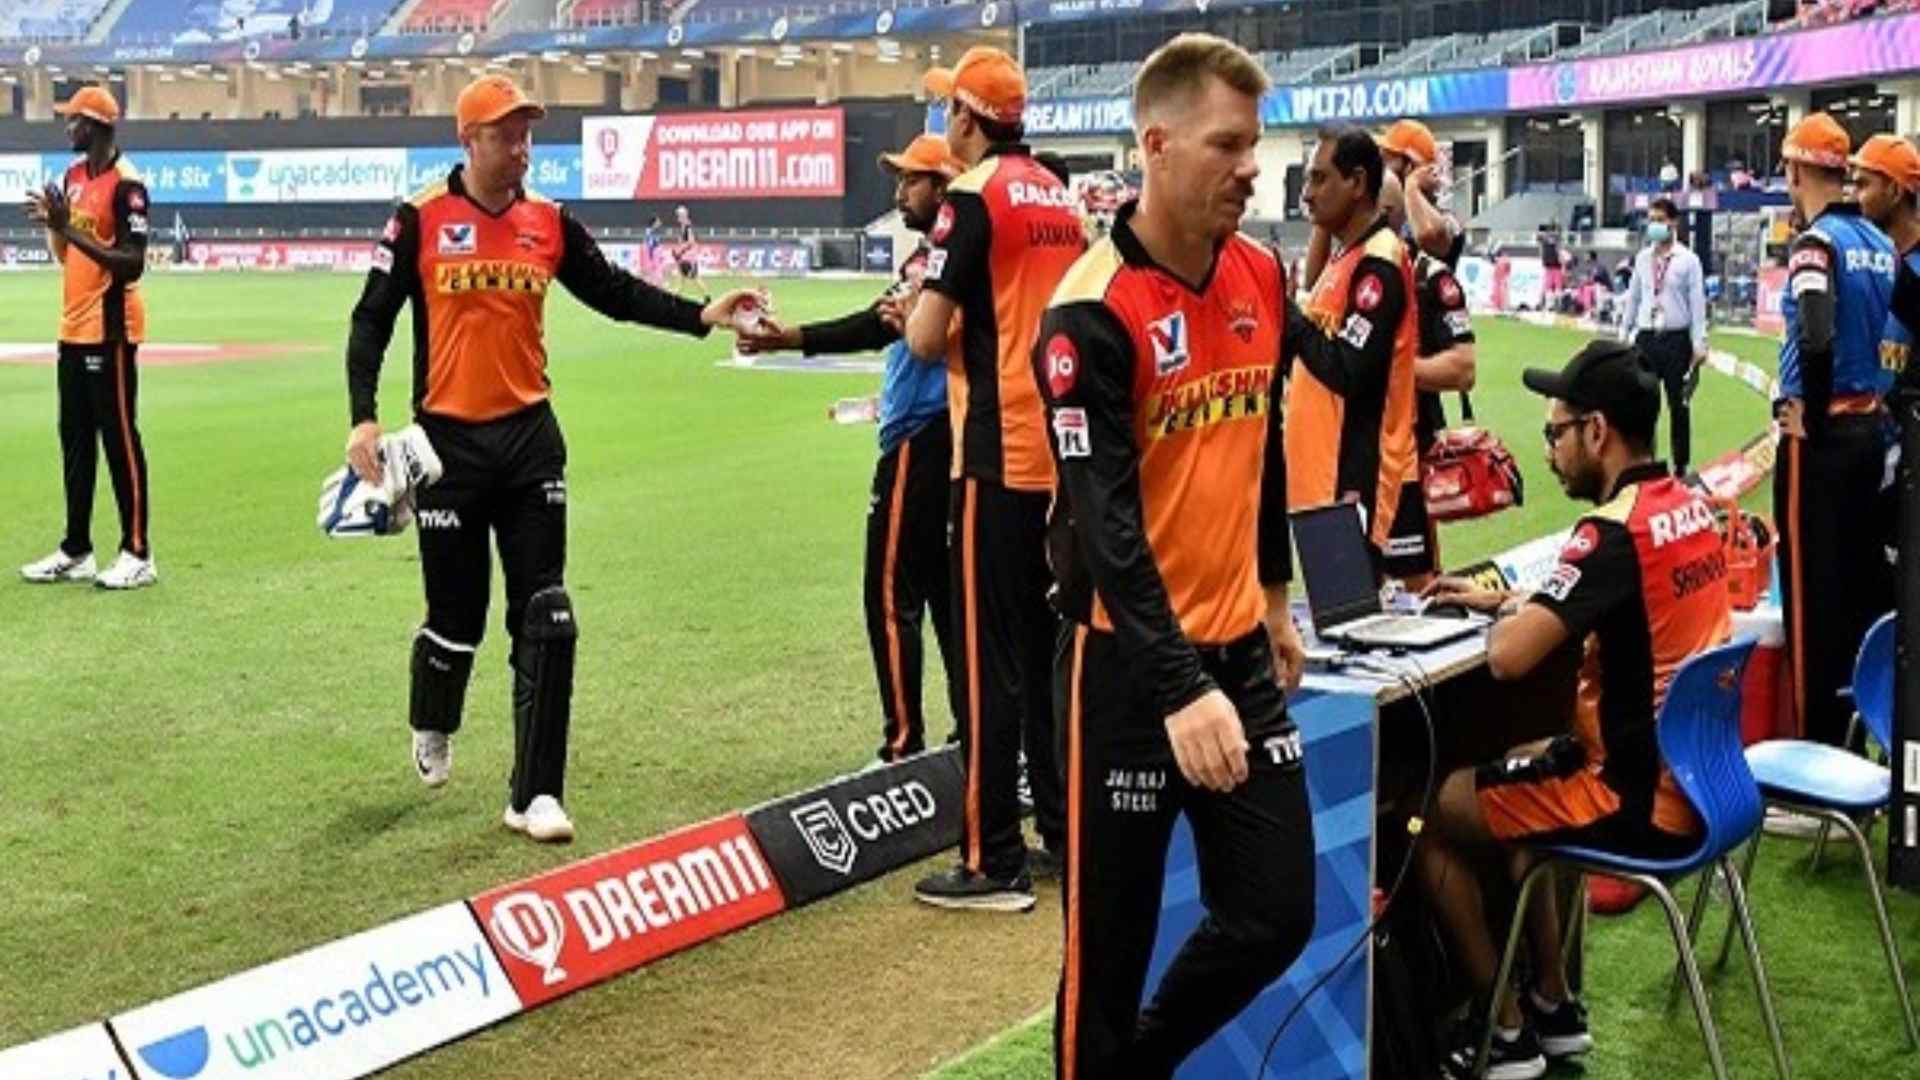 David Warner and Eoin Morgan have star players in their respective teams, giving the Kolkata Knight Riders vs Sunrisers Hyderabad clash a different edge.